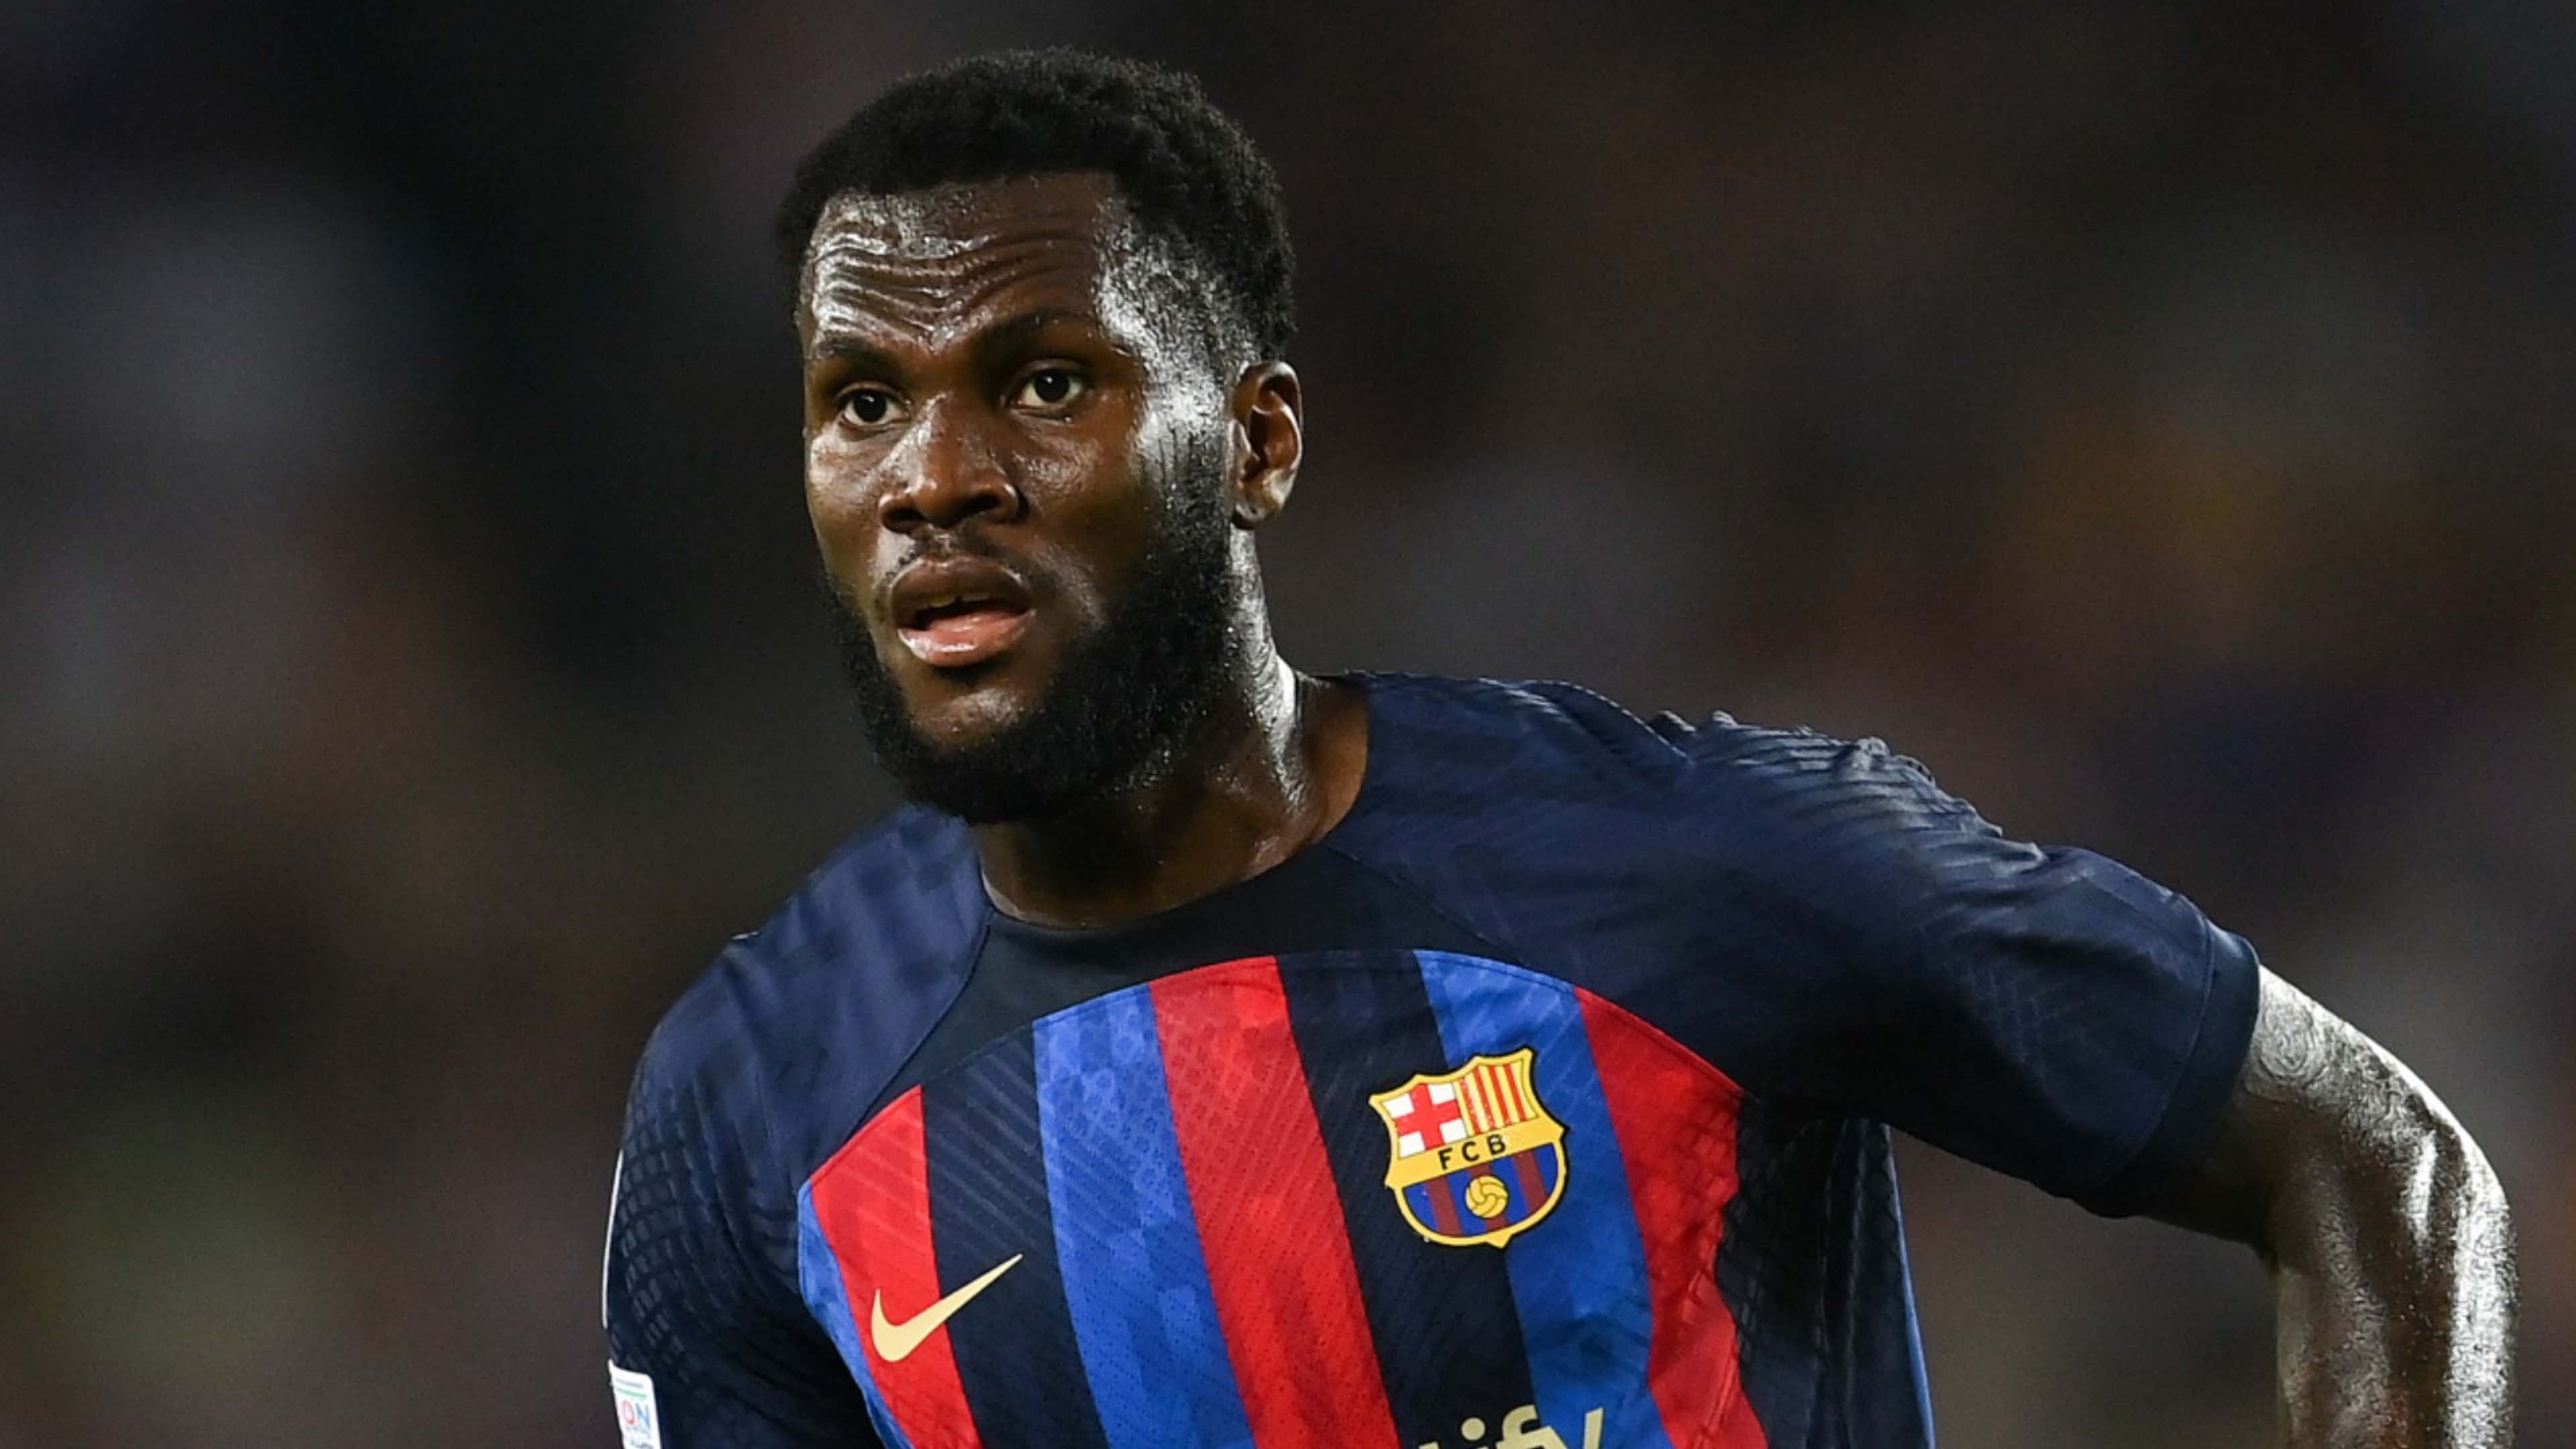 Saudi Arabia snap up another signing! Barcelona in talks over €15m Franck Kessie sale to Al-Ahli just a year his move to Camp Nou | Goal.com US